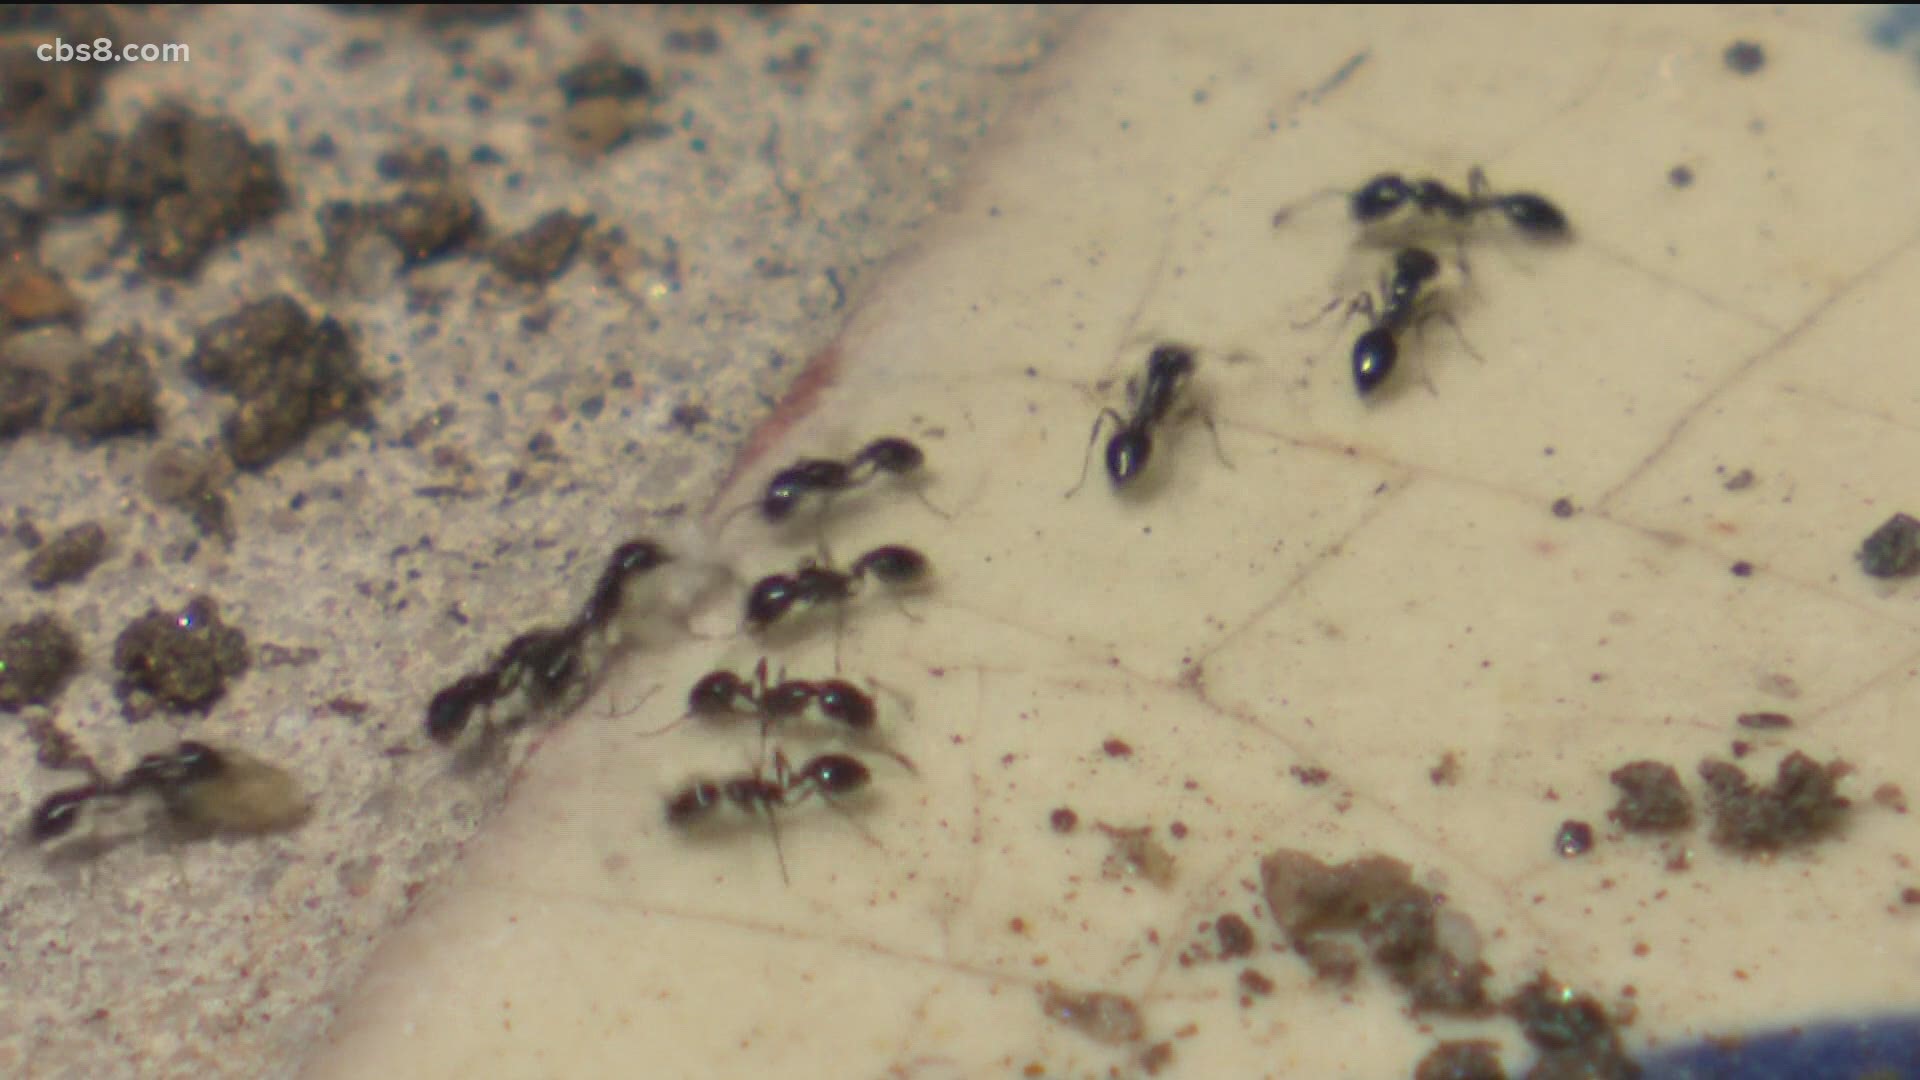 Because of the hot, dry conditions, ants are searching for shelter, food and water indoors.